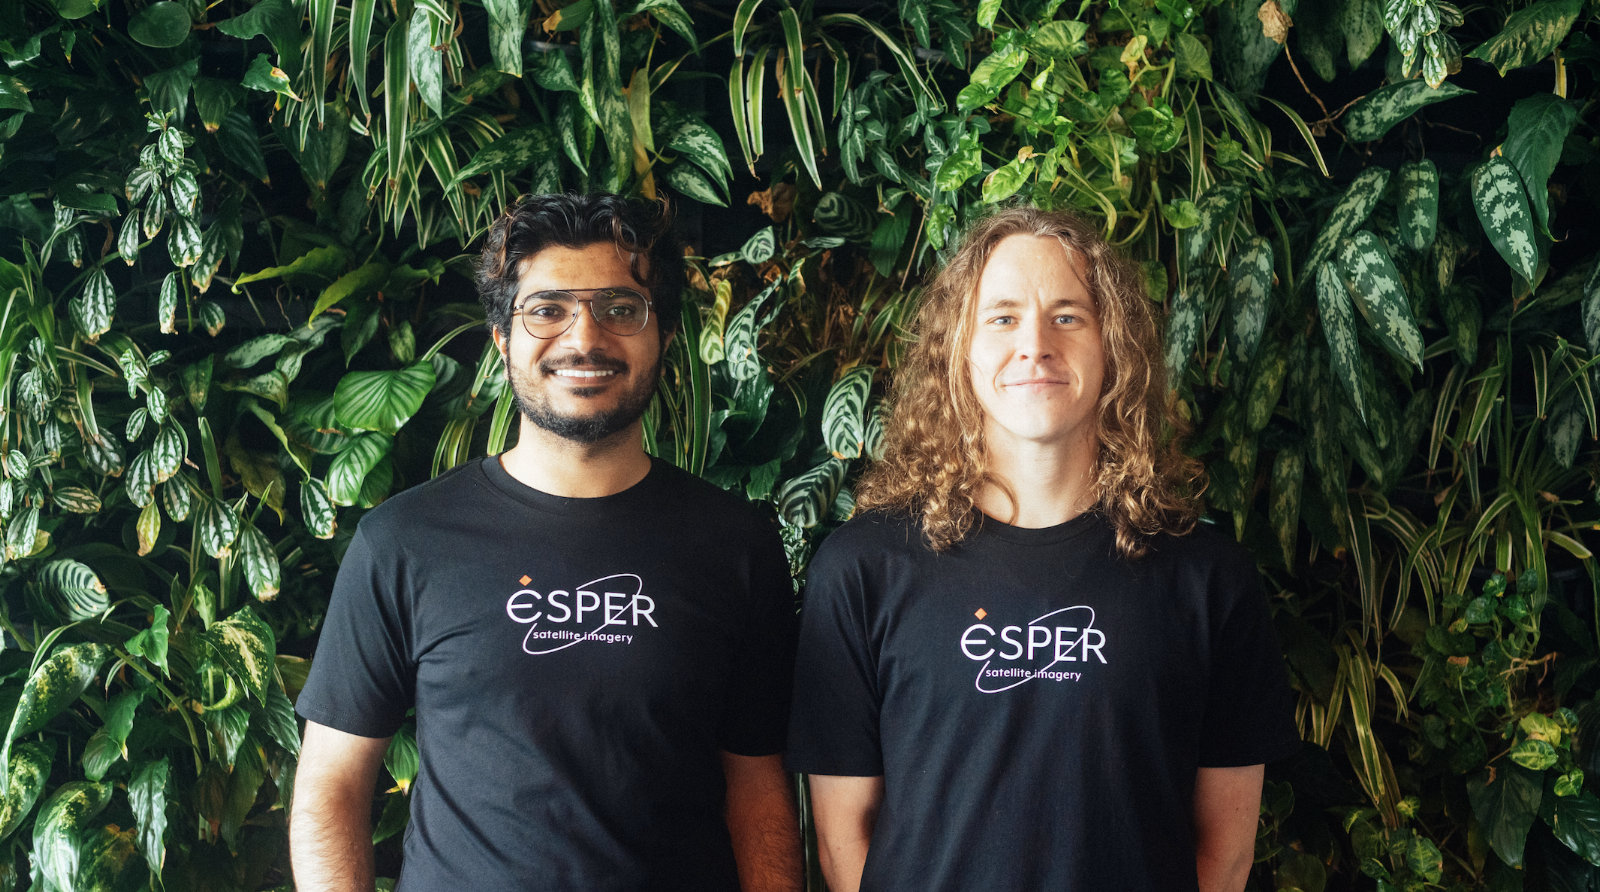 Australian space startup Esper wants to build hyperspectral sats for cheap